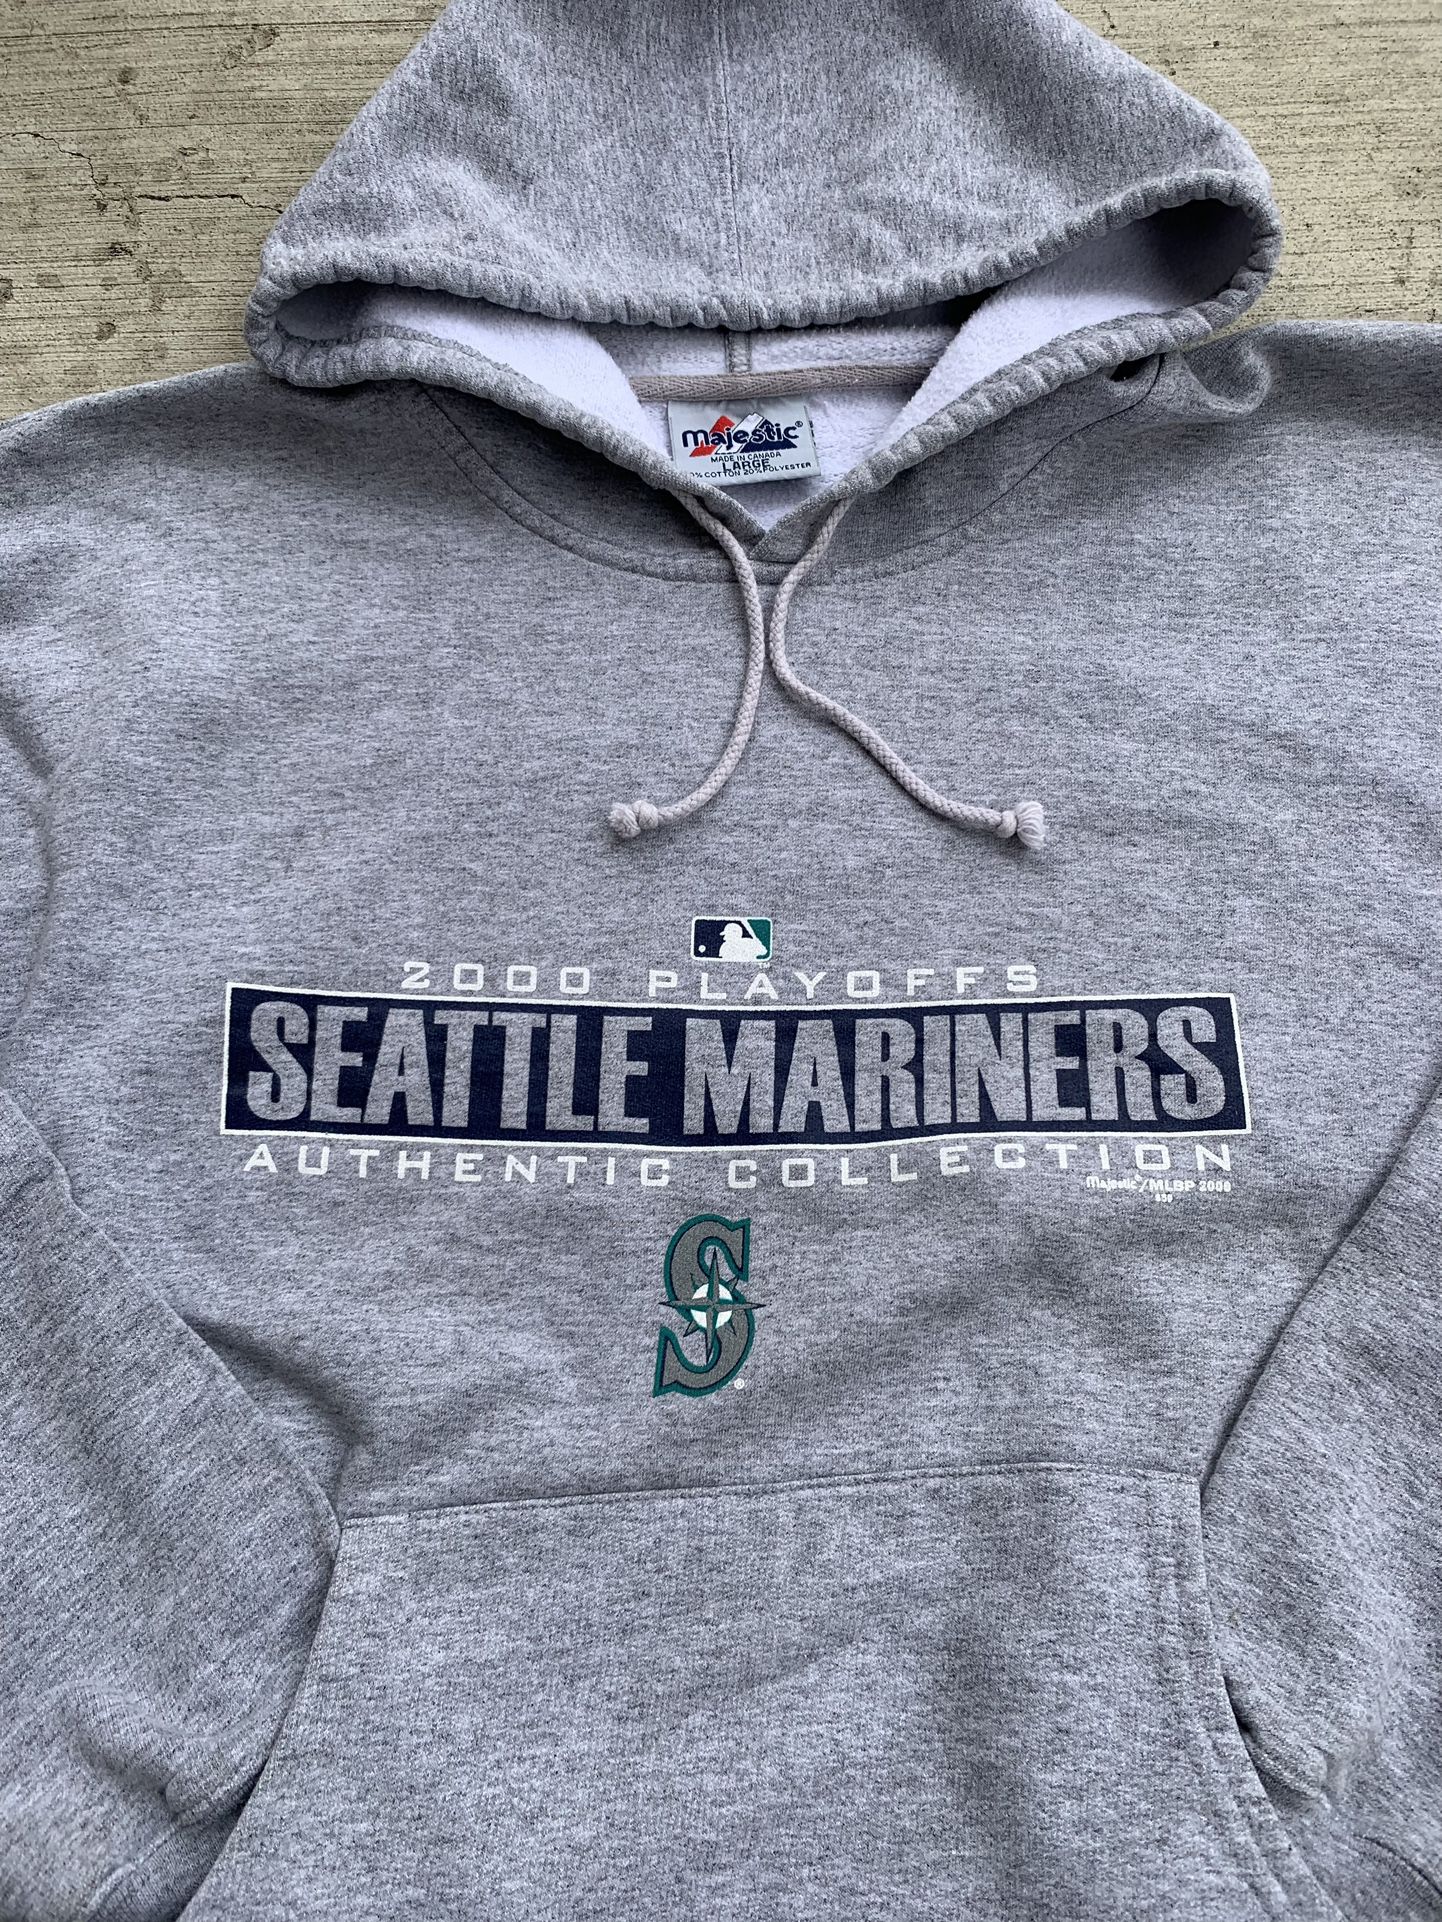 Vintage Majestic Seattle Mariners Playoff Collection 2001 Baseball